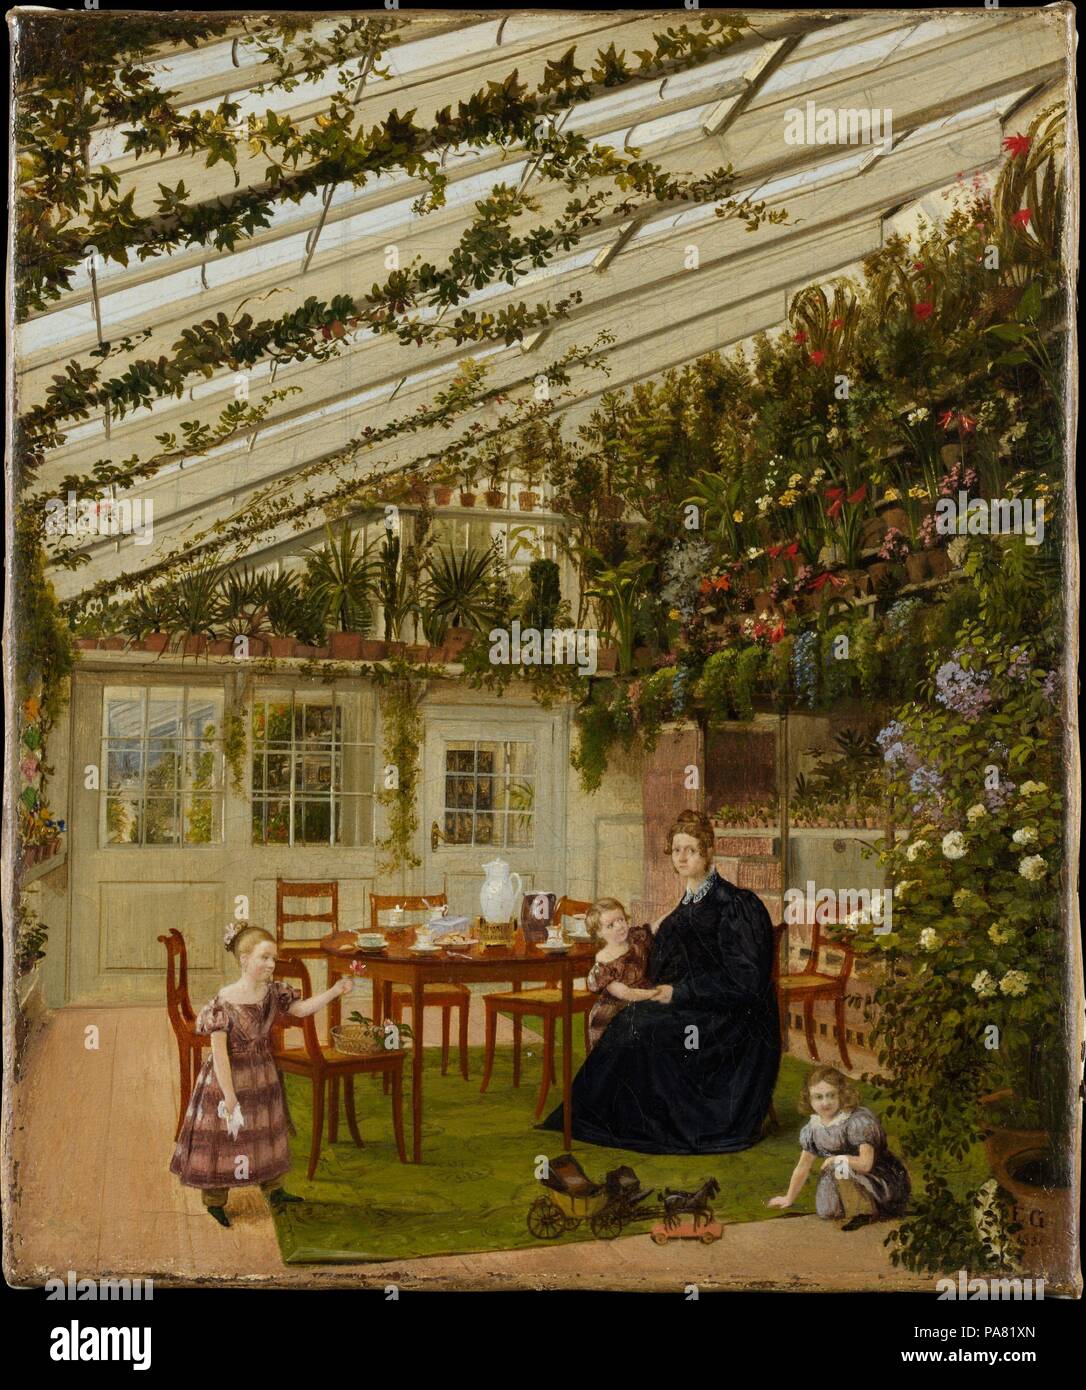 The Family of Mr. Westfal in the Conservatory. Artist: Eduard Gaertner (German, Berlin 1801-1877 Zechlin). Dimensions: 9 3/8 x 7 7/8 in. (23.8 x 20 cm). Date: 1836.    This light-filled conservatory belonged to the prosperous Berlin wool merchant Christian Carl Westphal, a passionate horticulturist. The stark glass structure here serves as a Biedermeier day-room for his family. Gaertner was the preeminent painter of Berlin's grand new boulevards, but this is one of only four interior scenes he is known to have painted; it may have been owned by Westfal, who was his landlord. Museum: Metropolit Stock Photo